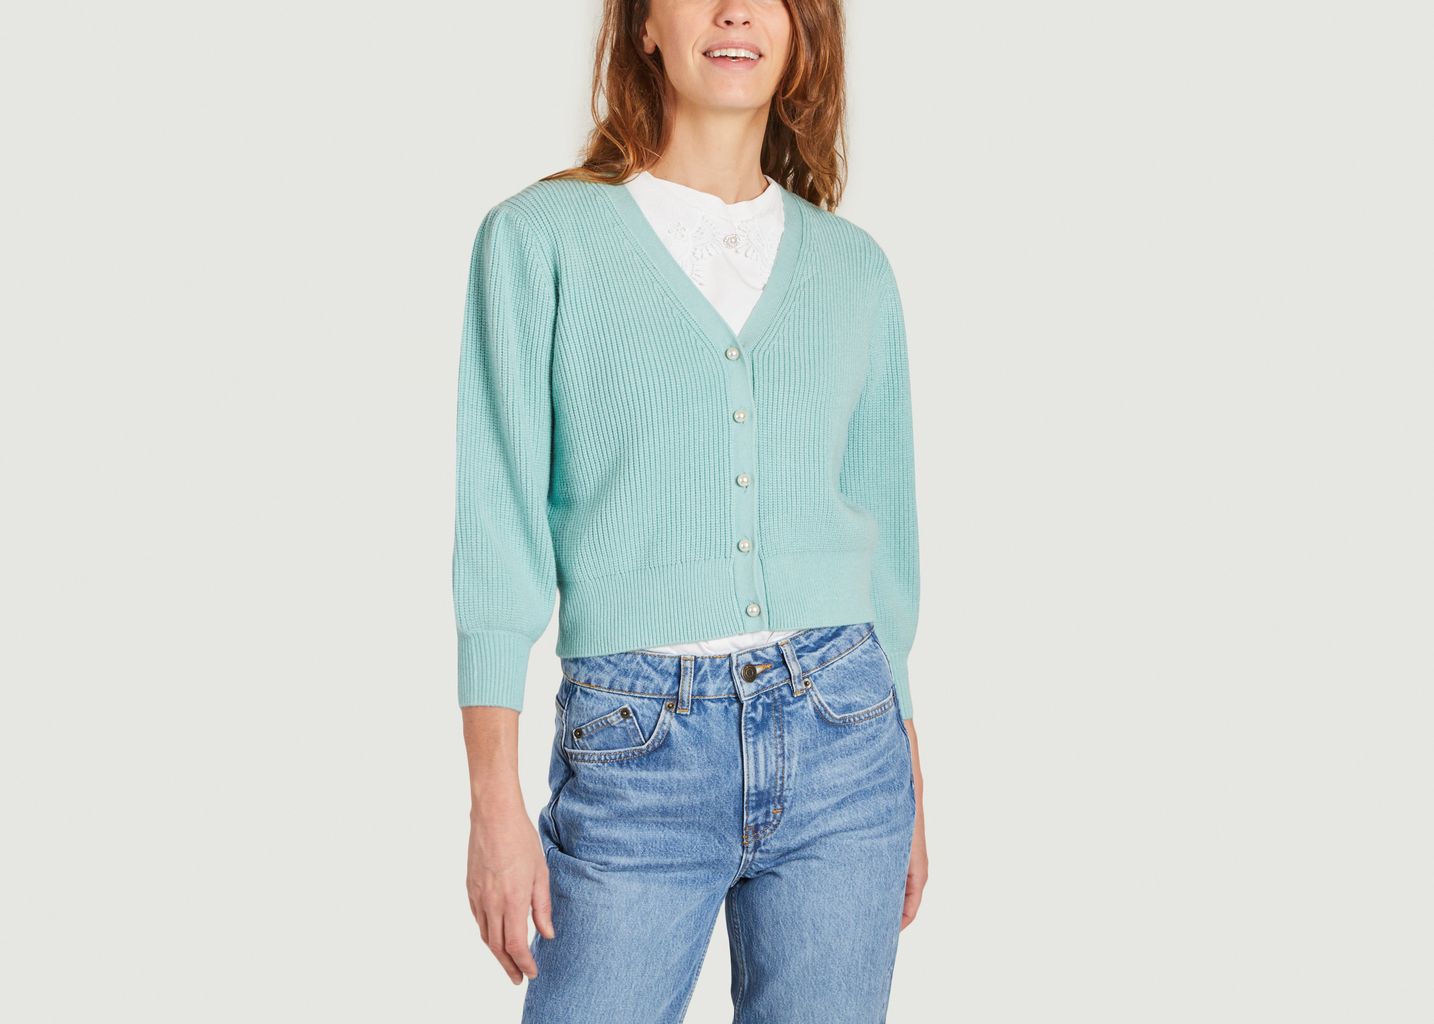 Mistou ribbed cardigan with pearls buttons - Maje